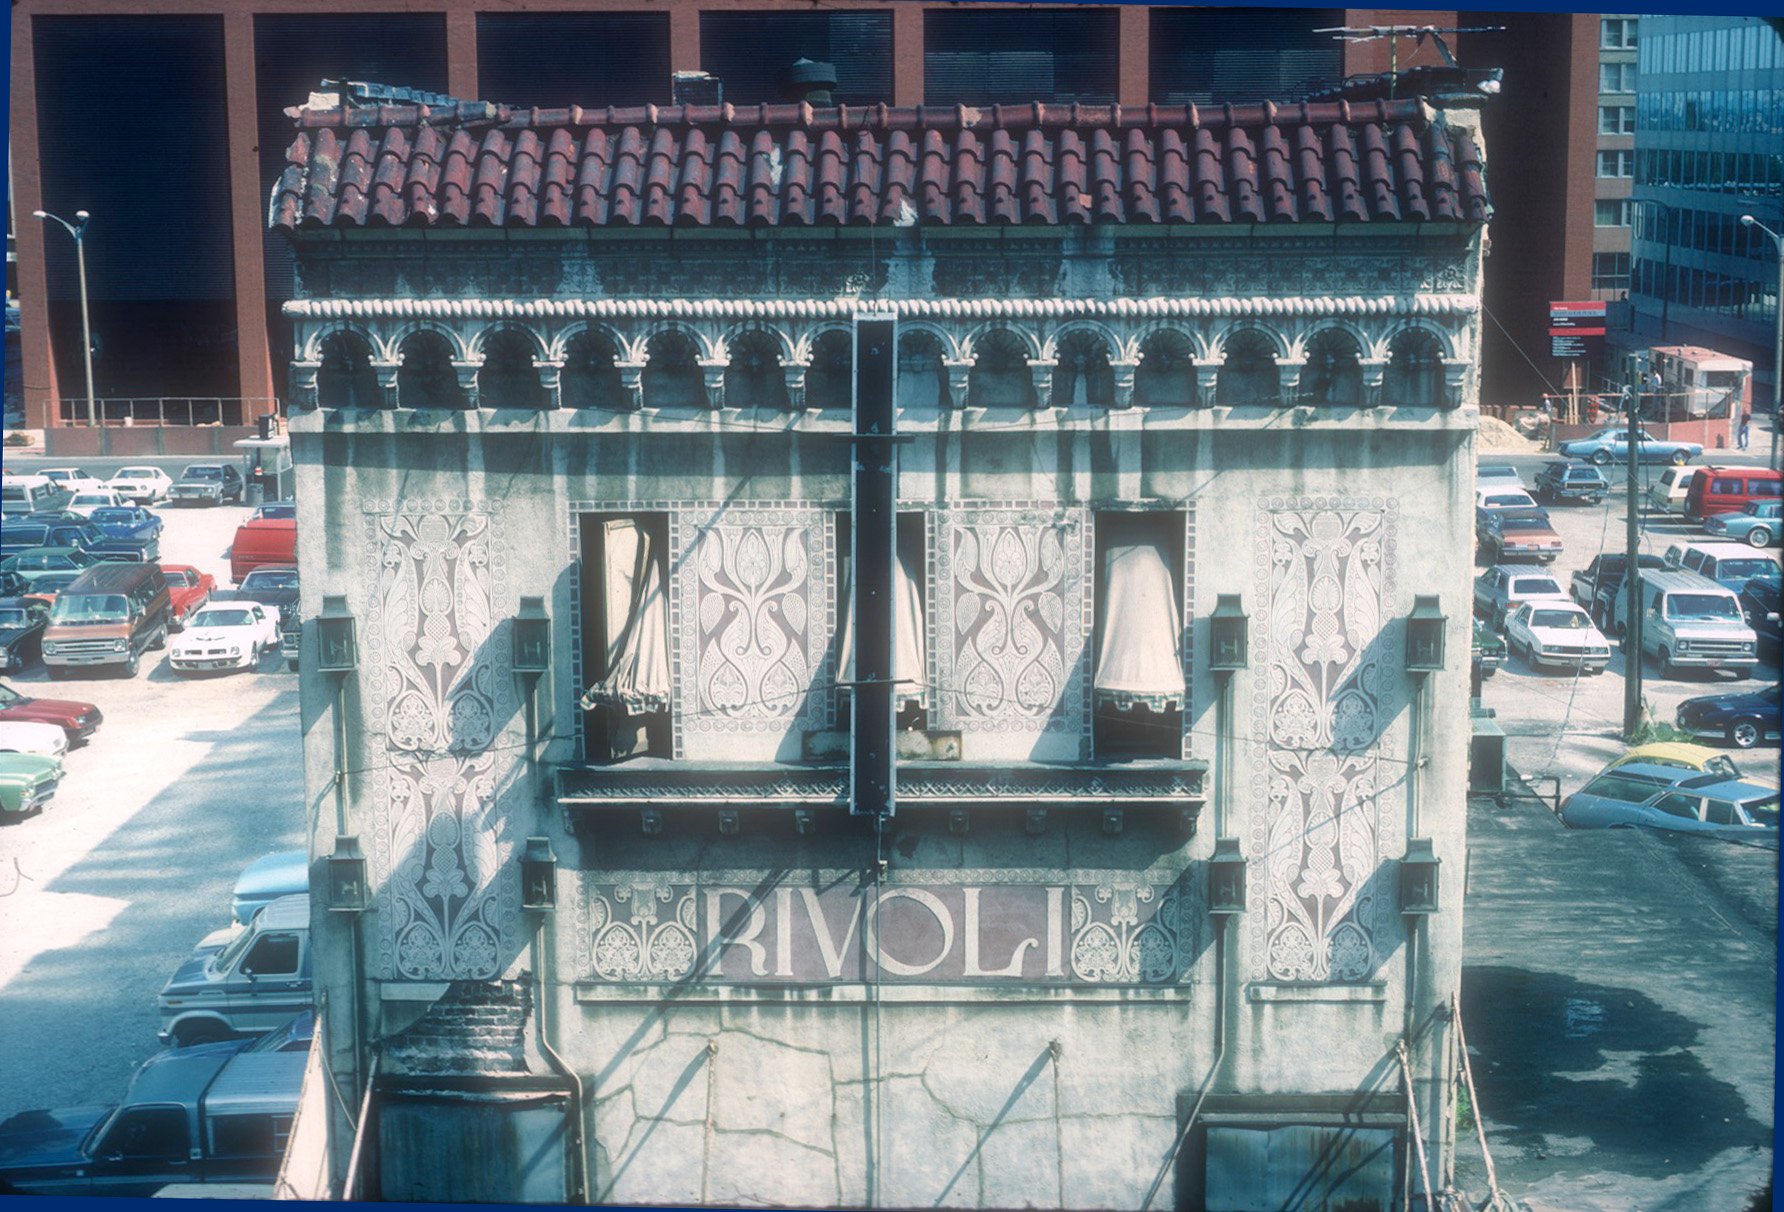 Archival image of the Rivoli Theater from 1983 in St. Louis, Missouri.